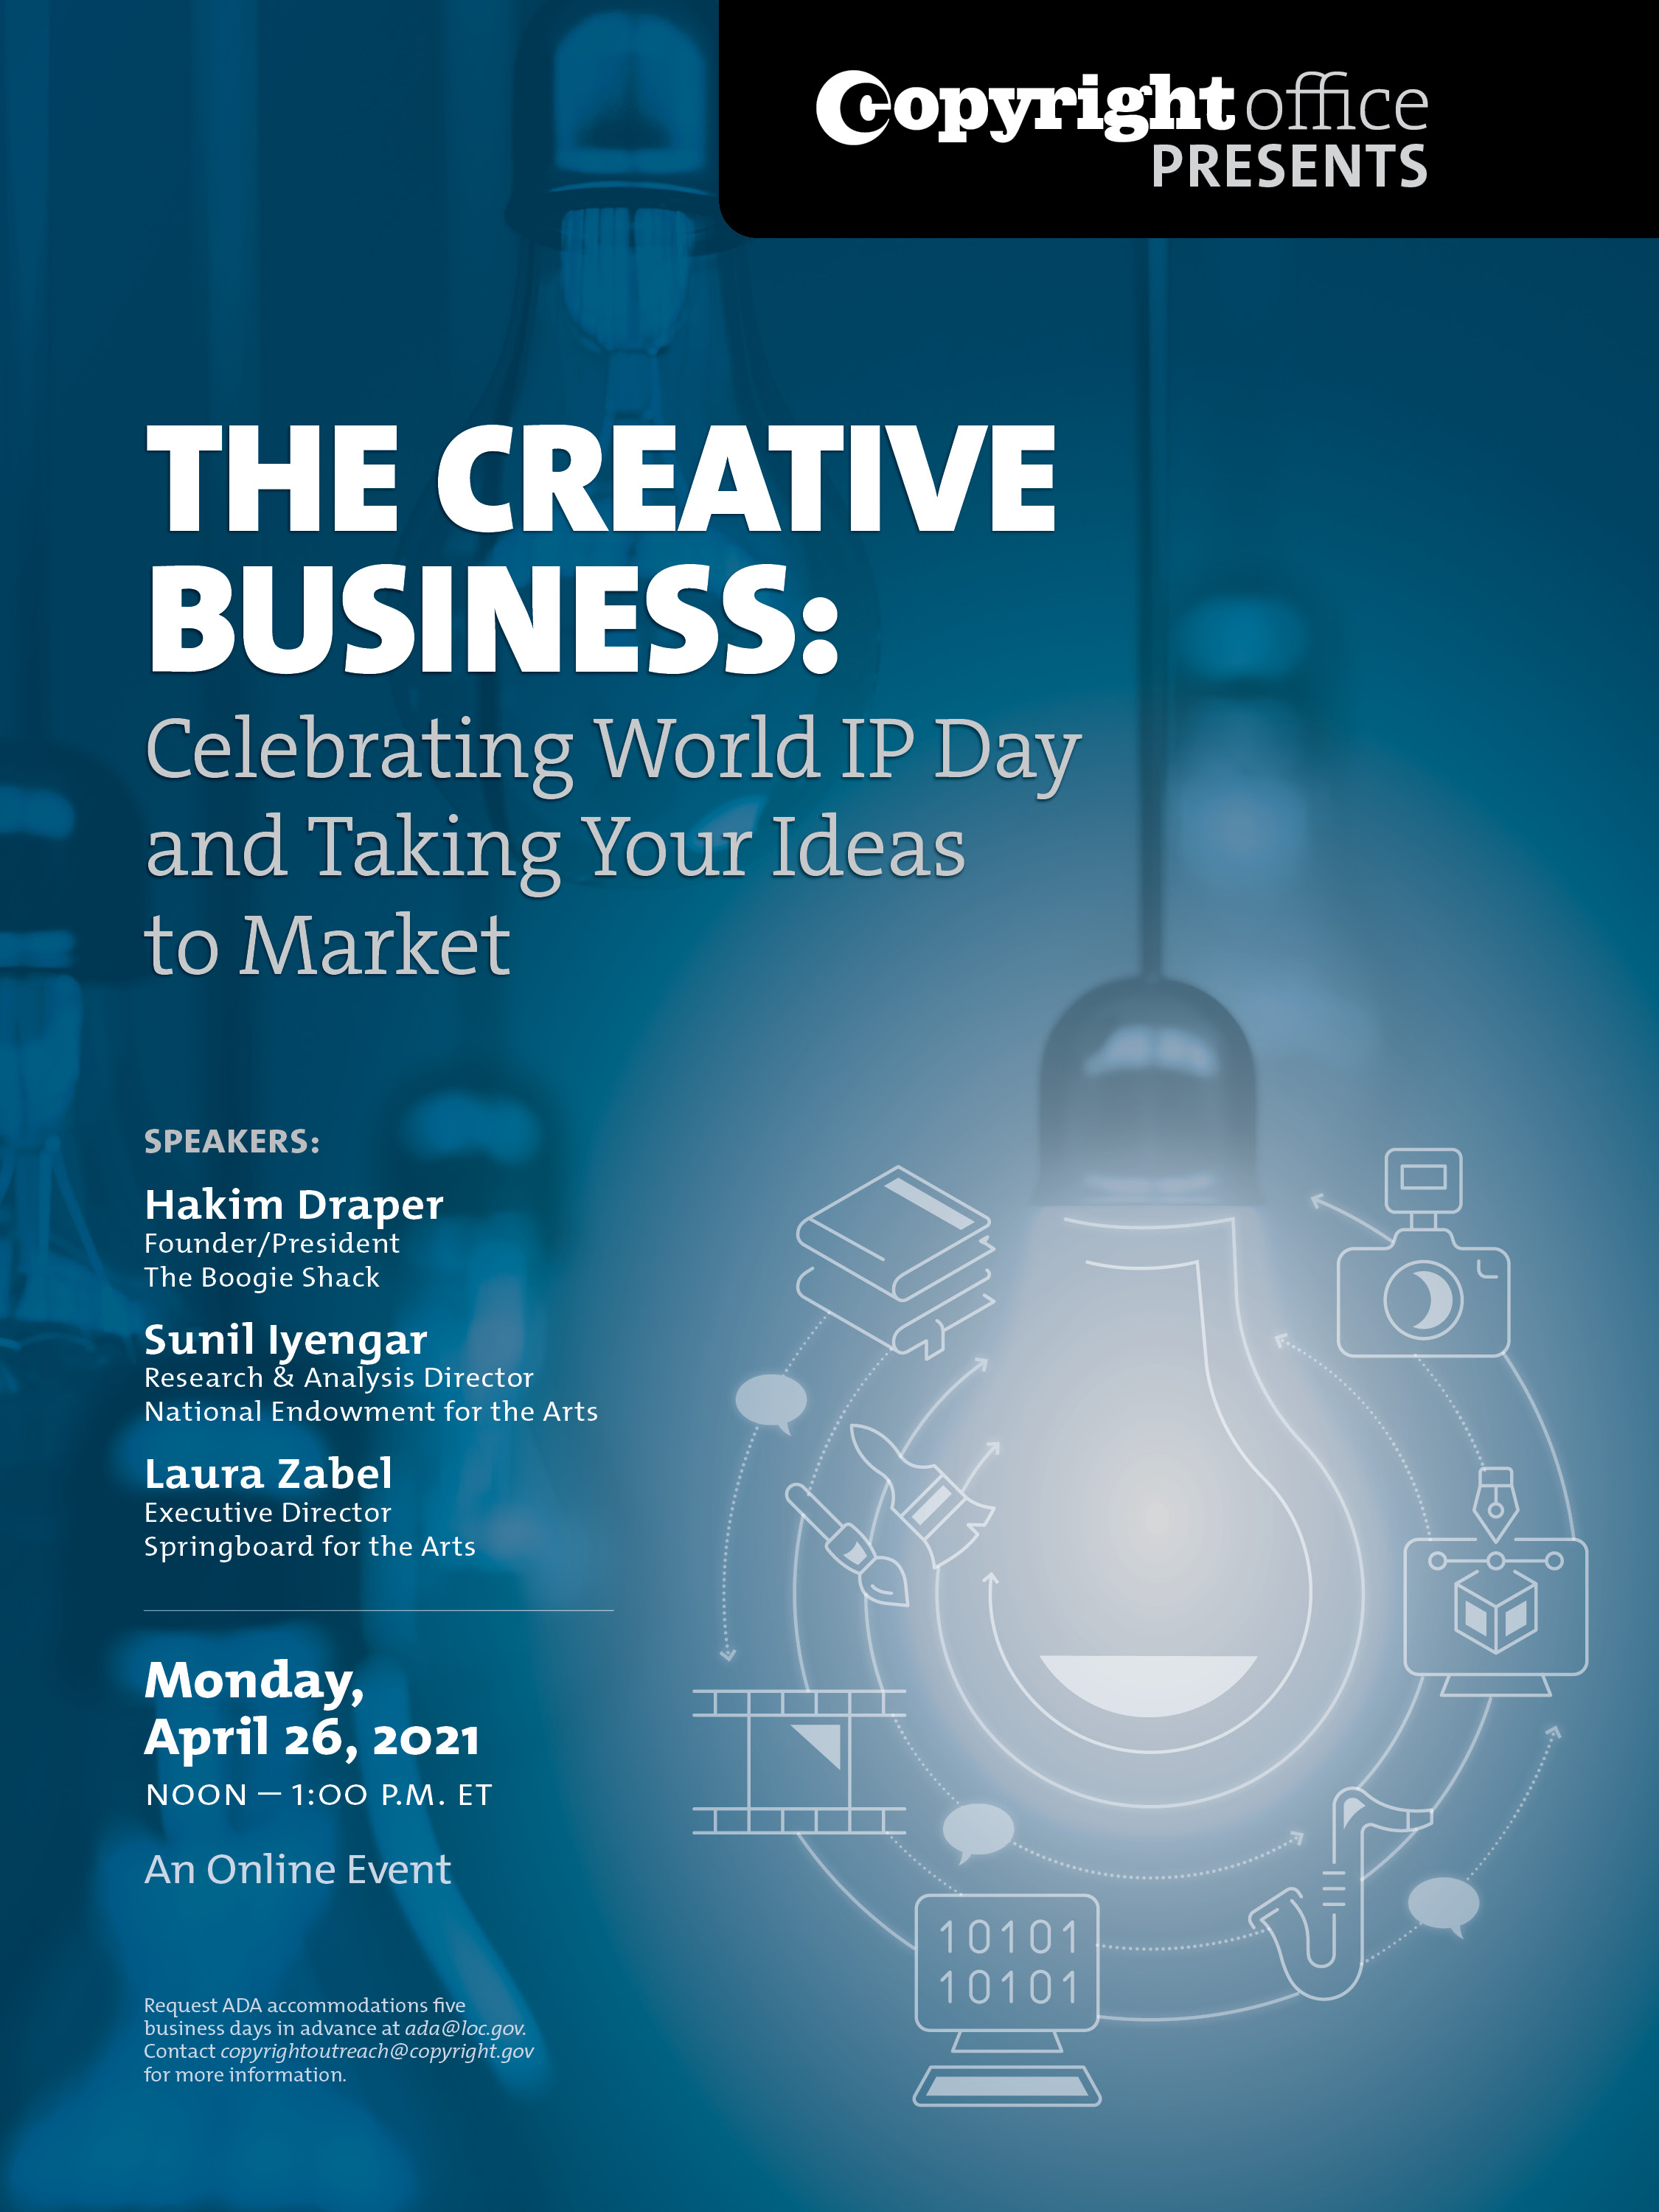 The Creative Business: Celebrating World IP Day and Taking Your Ideas to Market